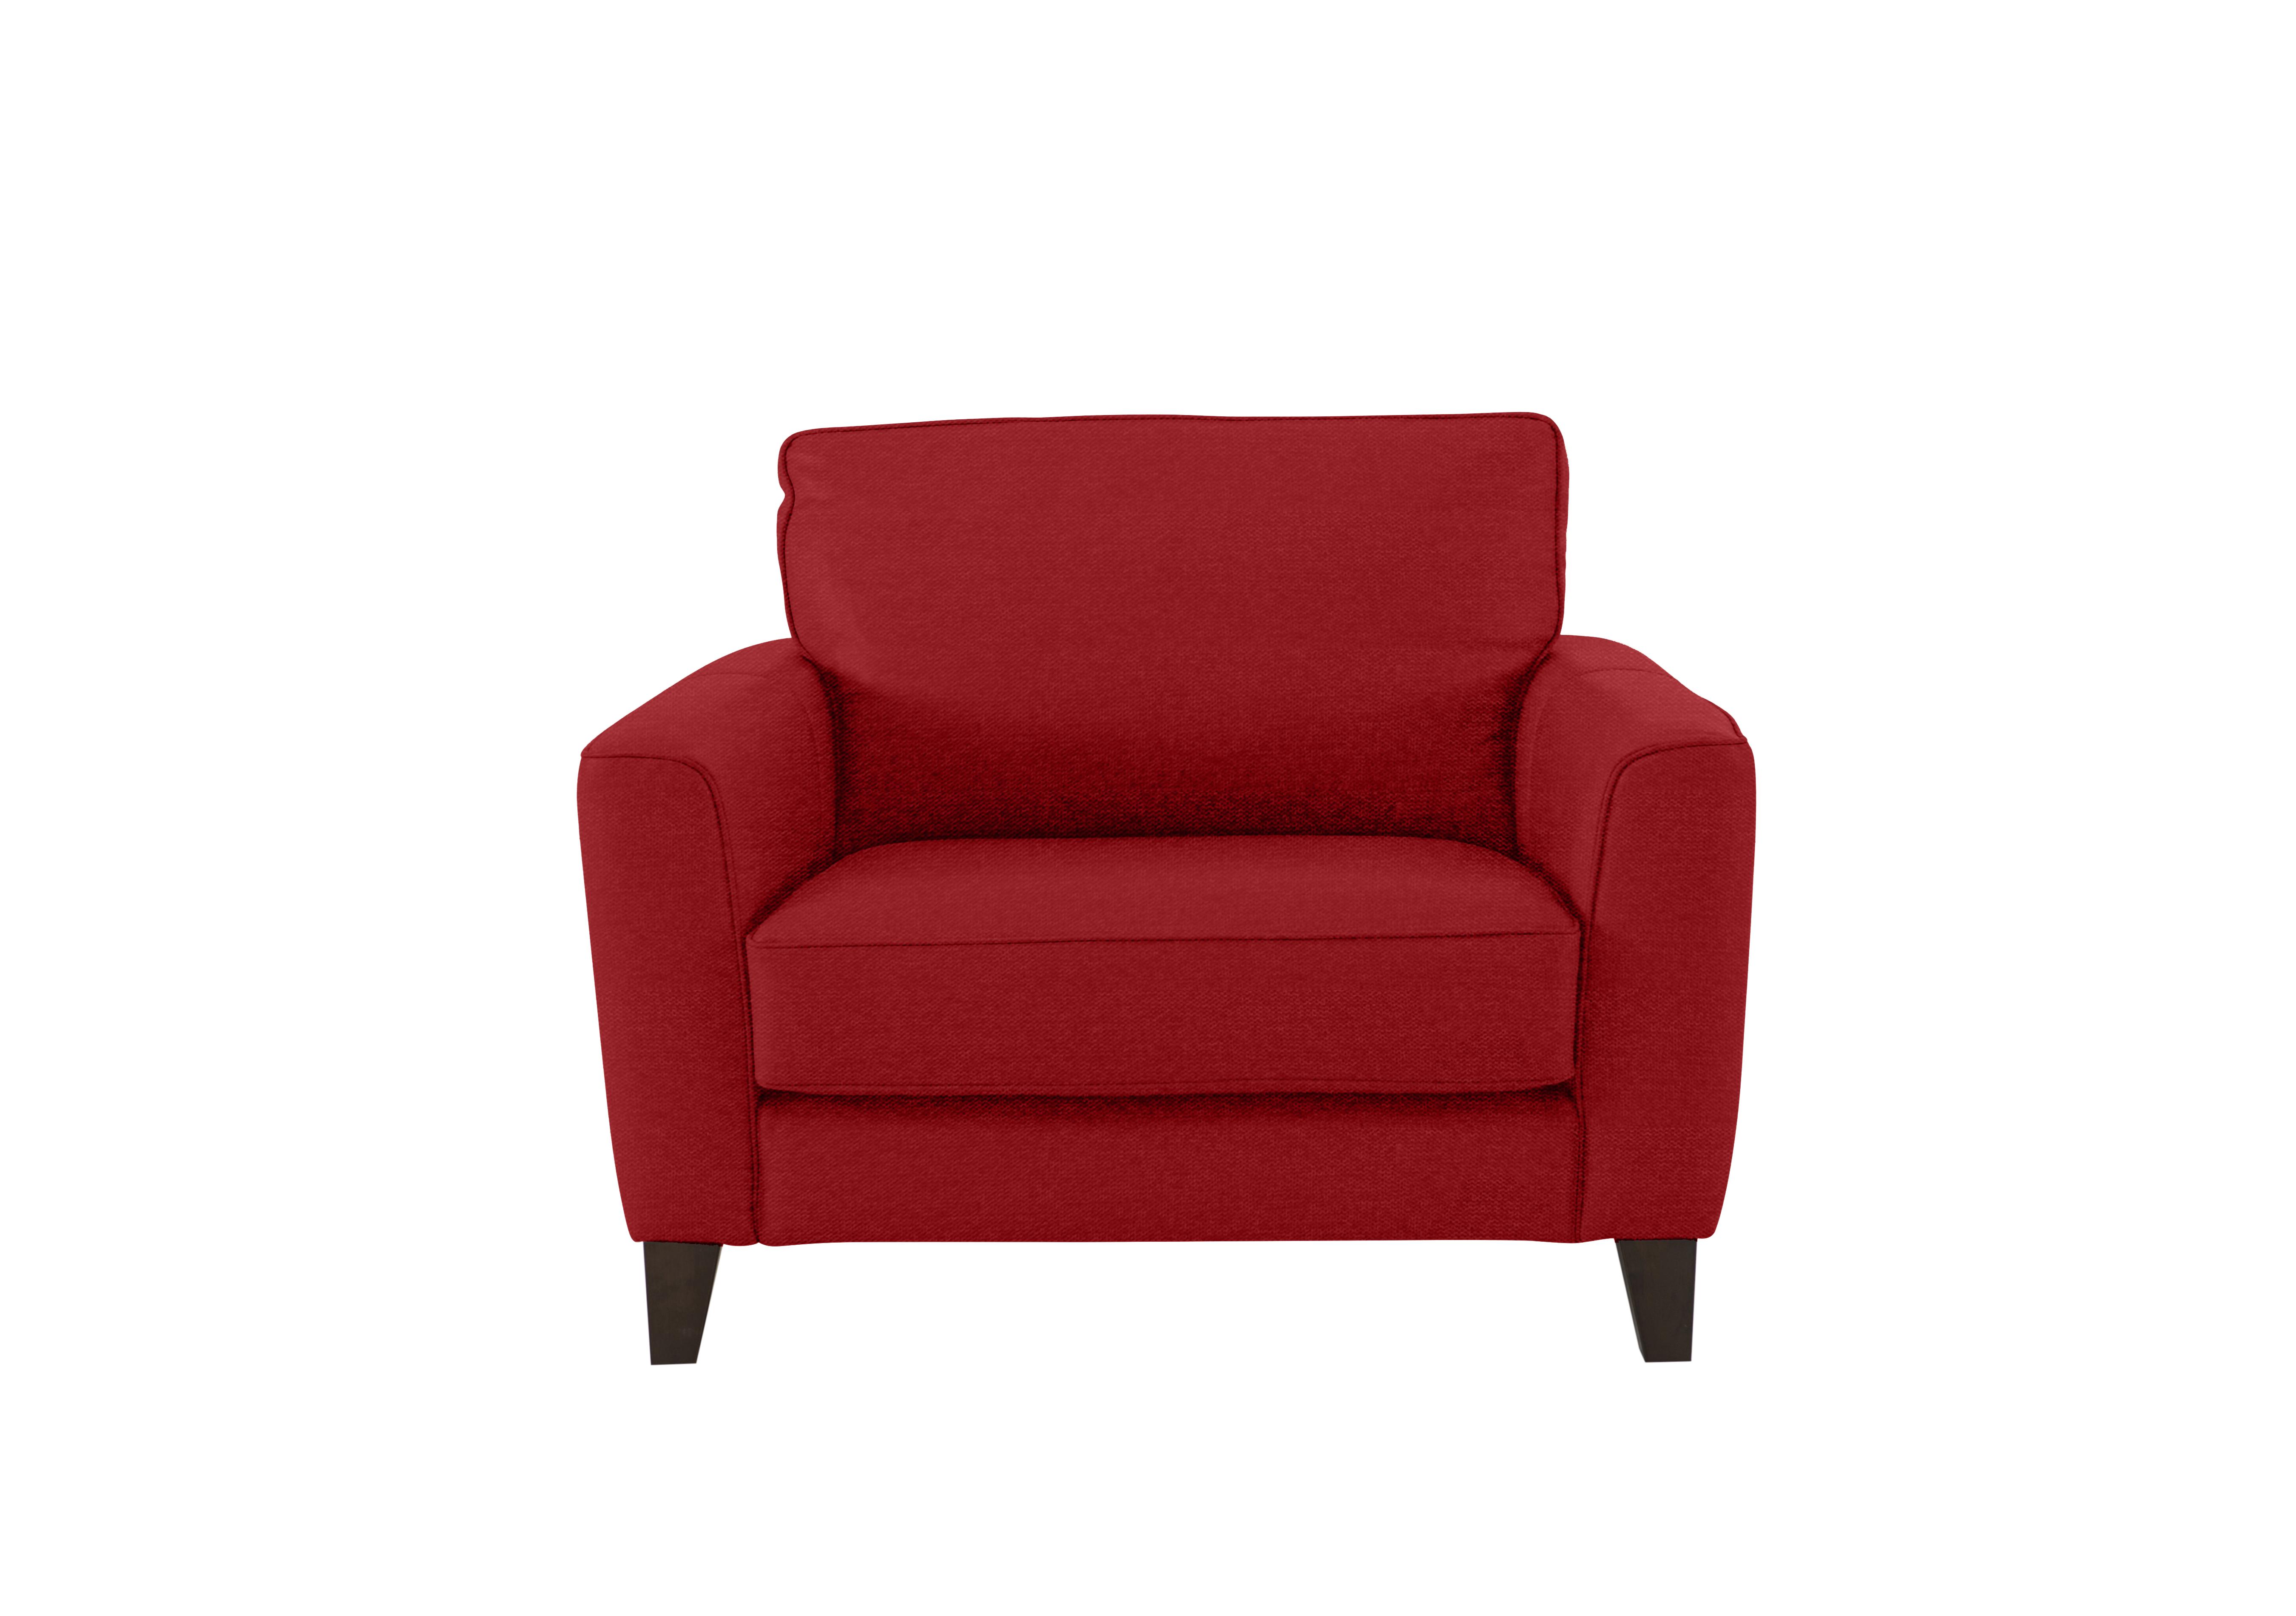 Brondby Fabric Cuddle Chair in Fab-Blt-R29 Red on Furniture Village